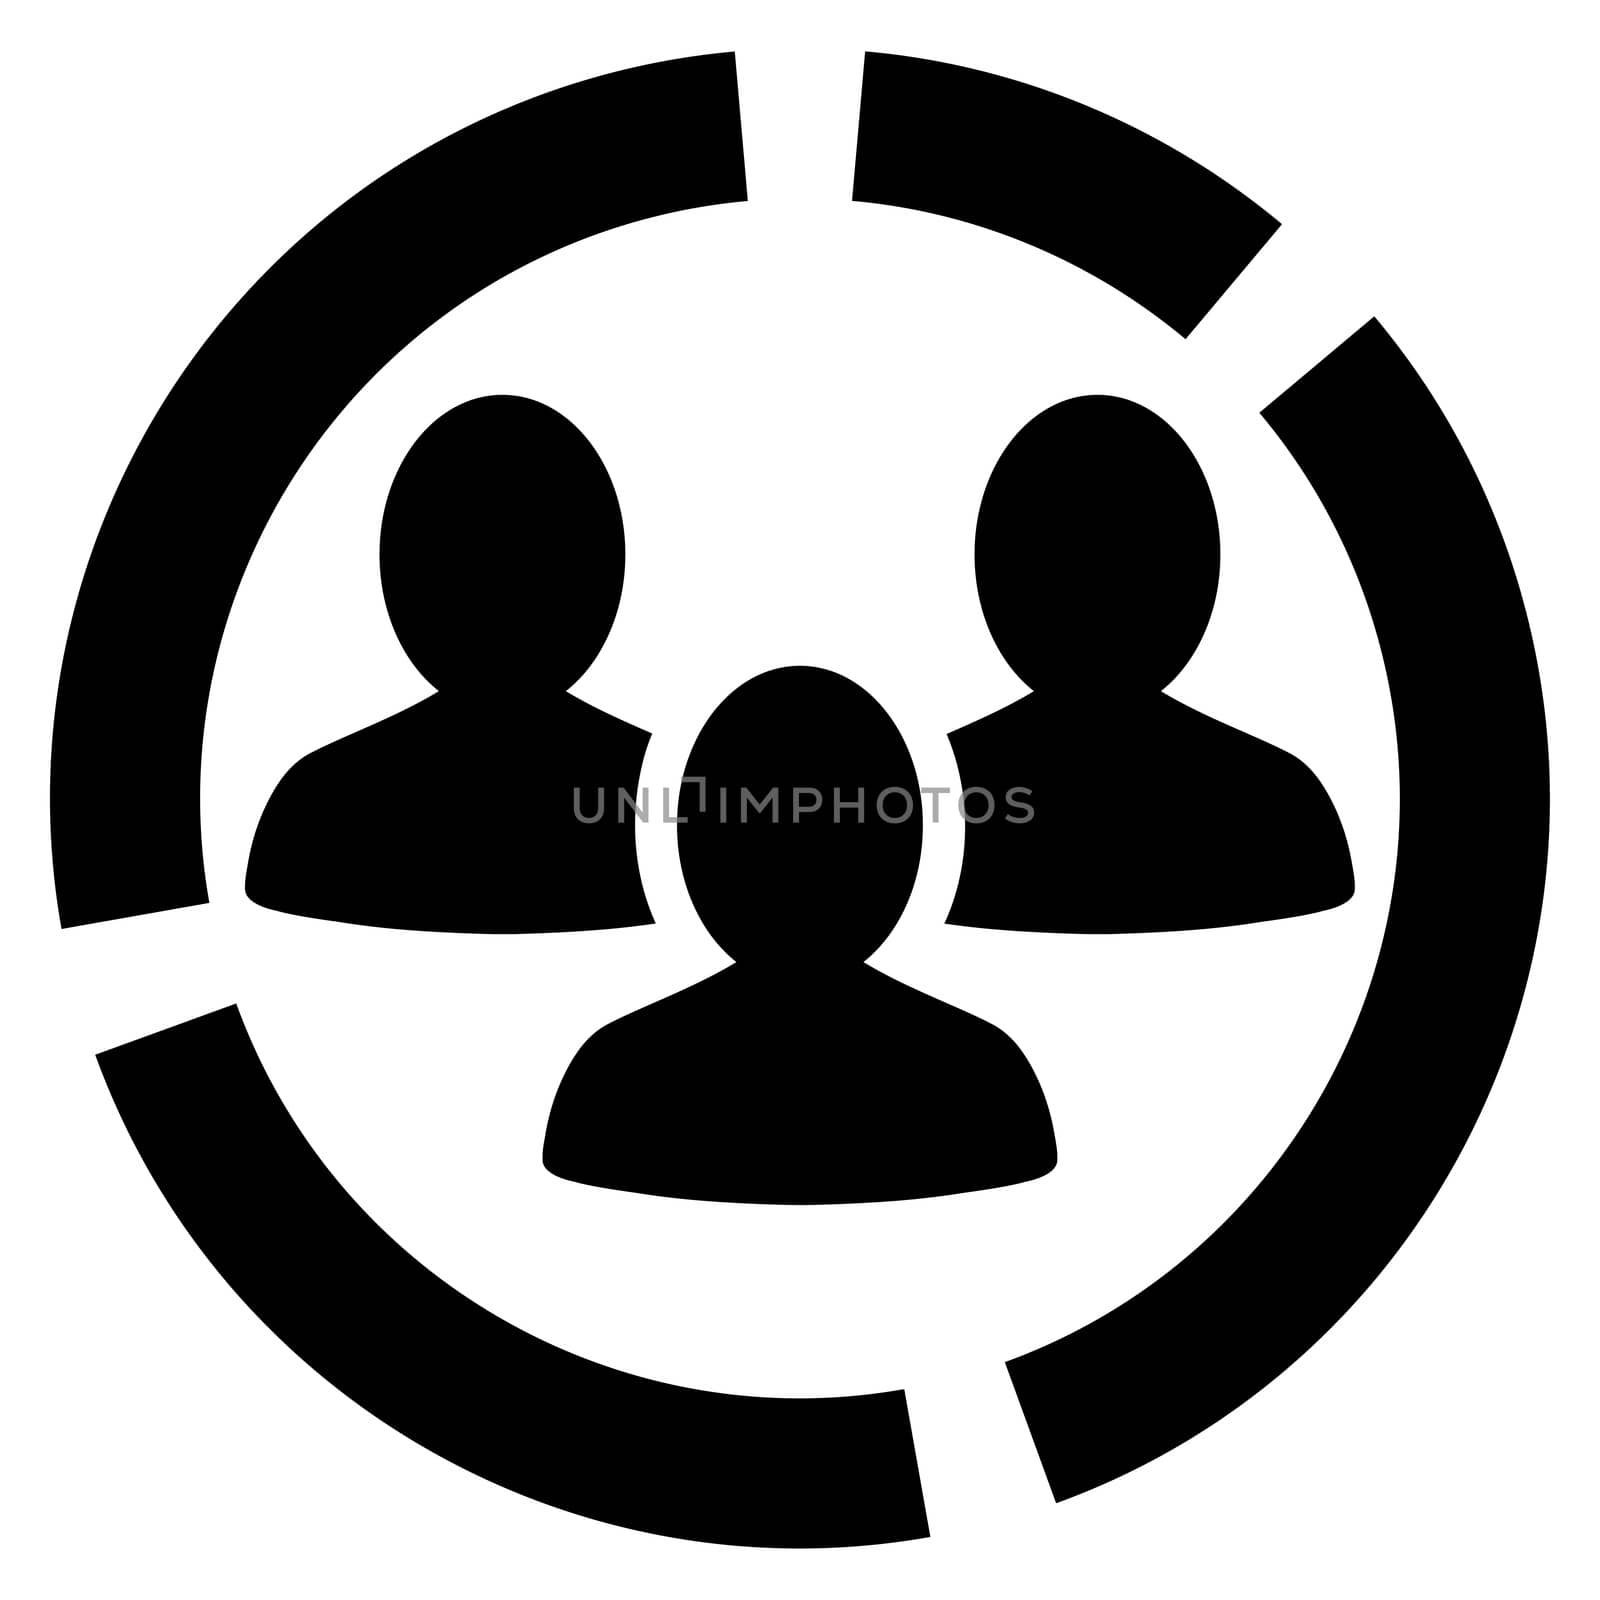 Demography diagram icon. Glyph style is flat symbol, black color, rounded angles, white background.